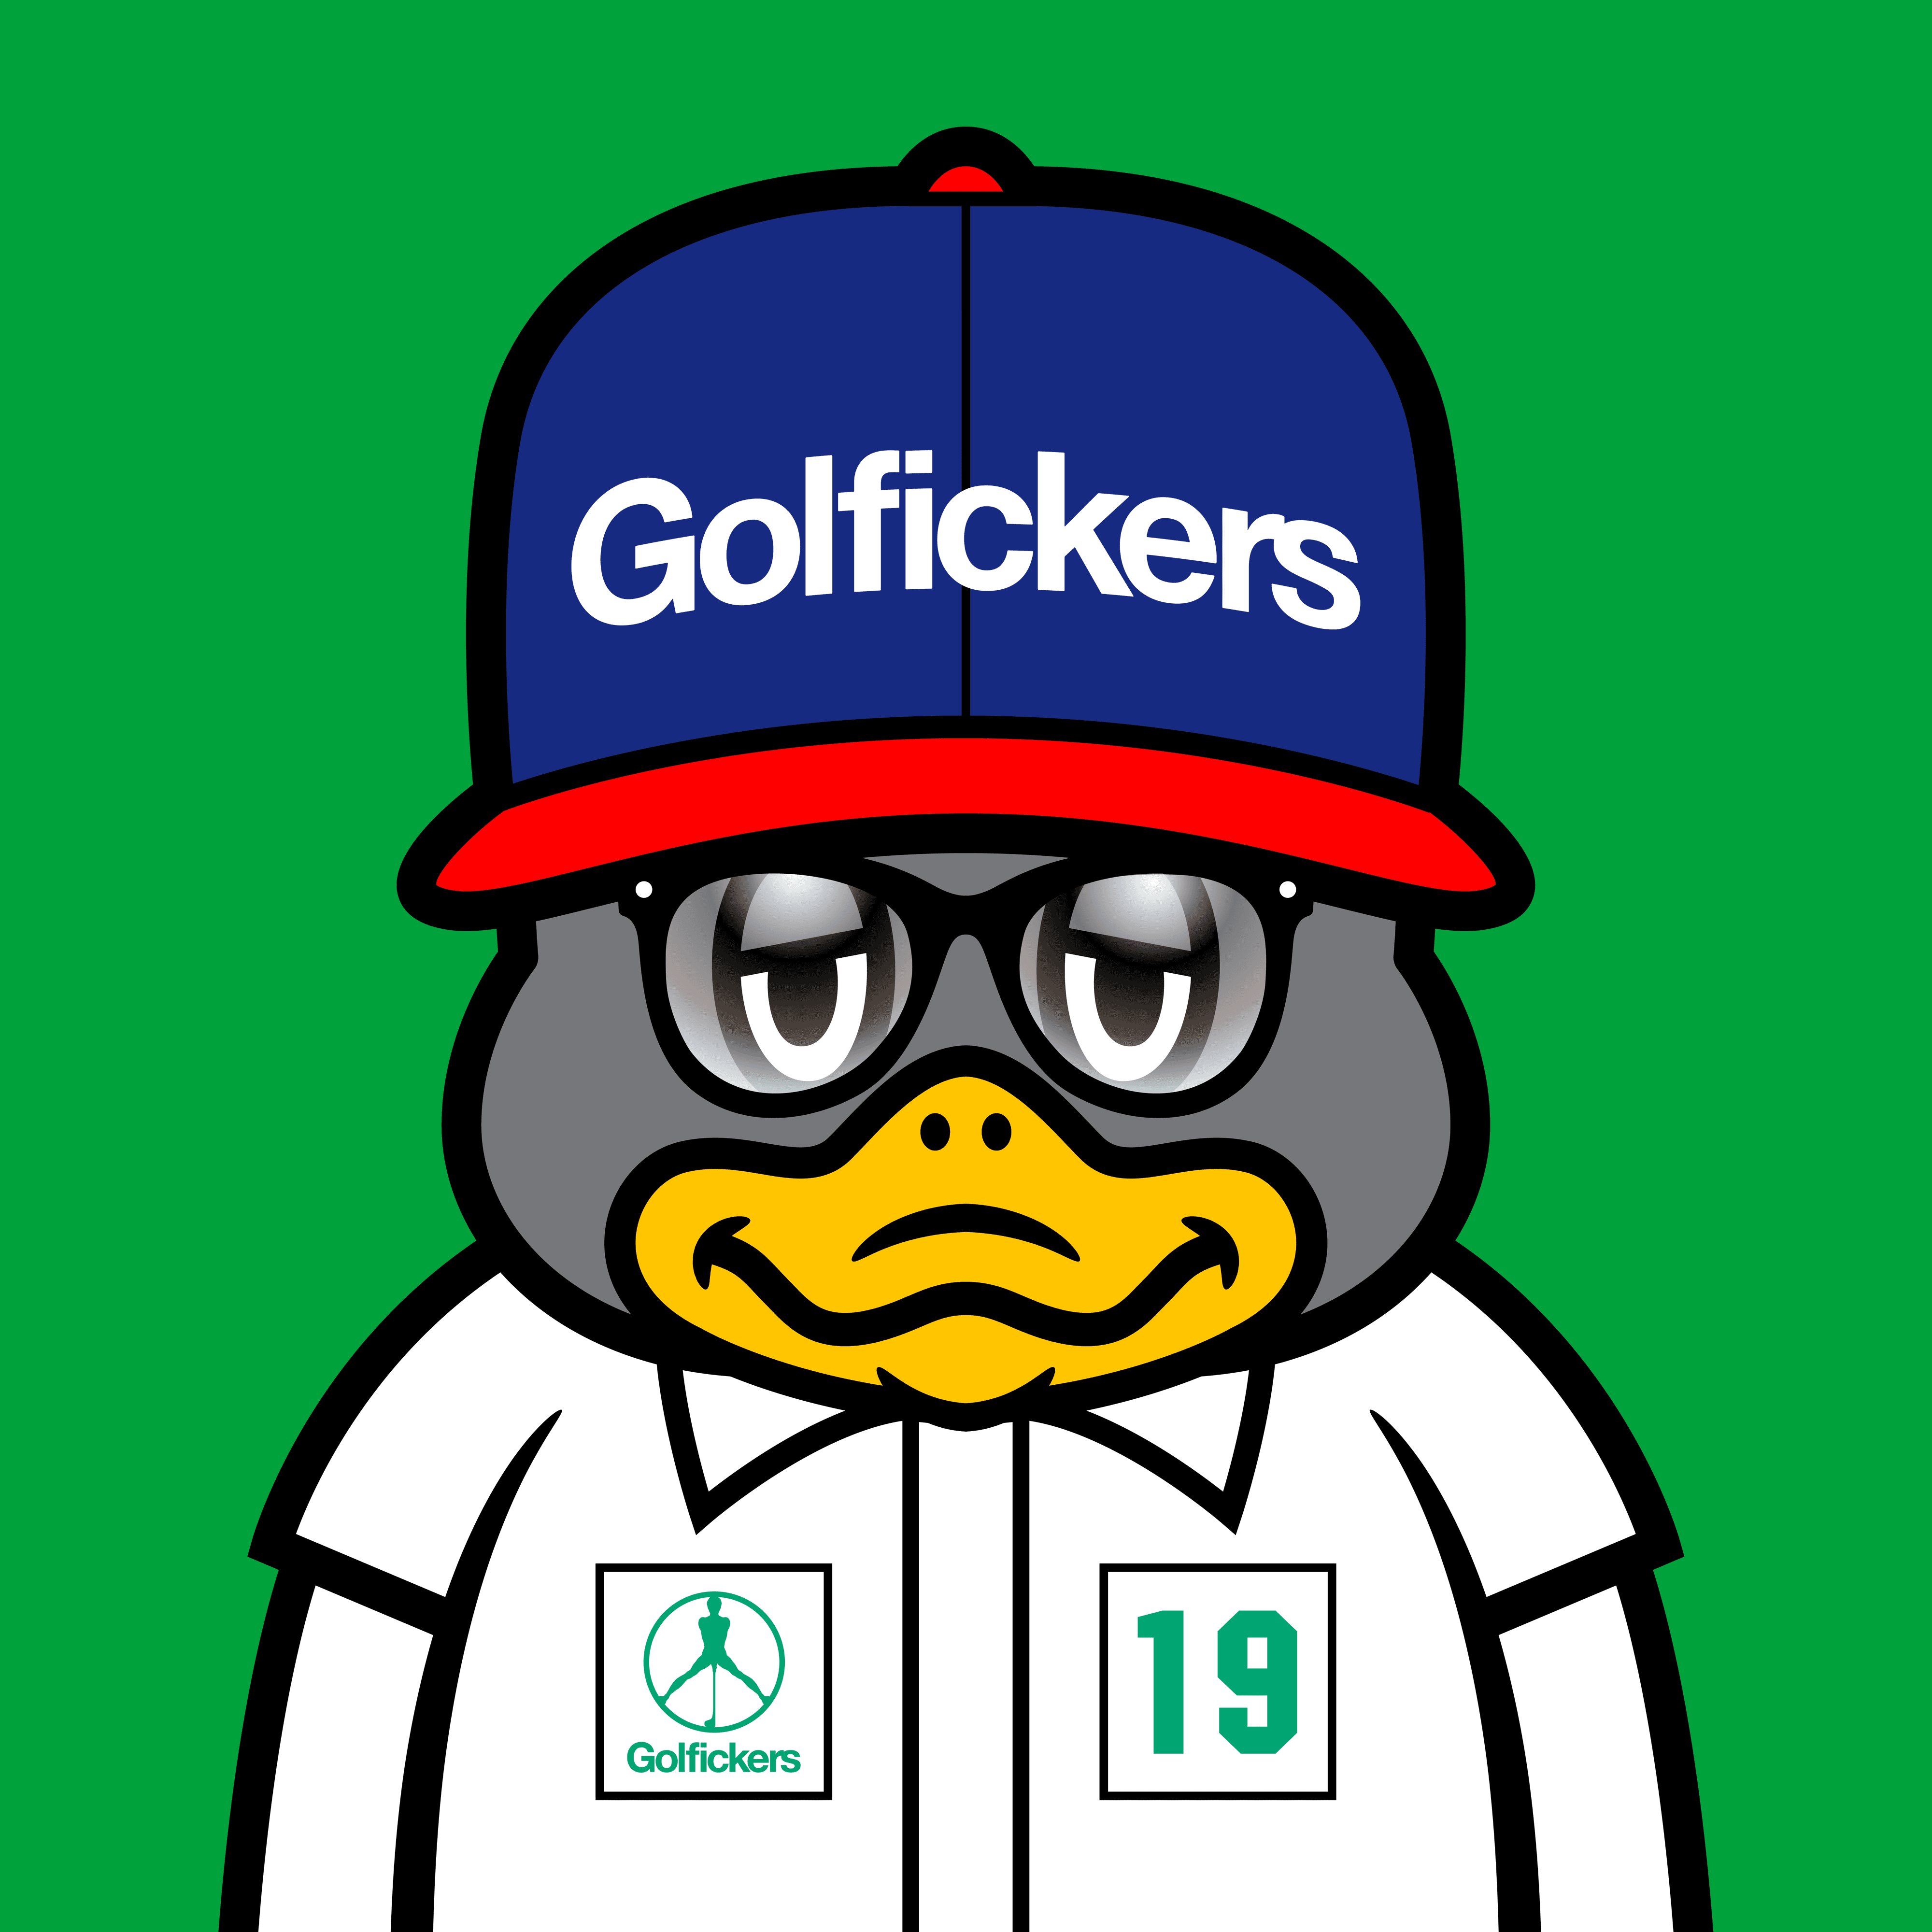 Golfickers The Duck #0019